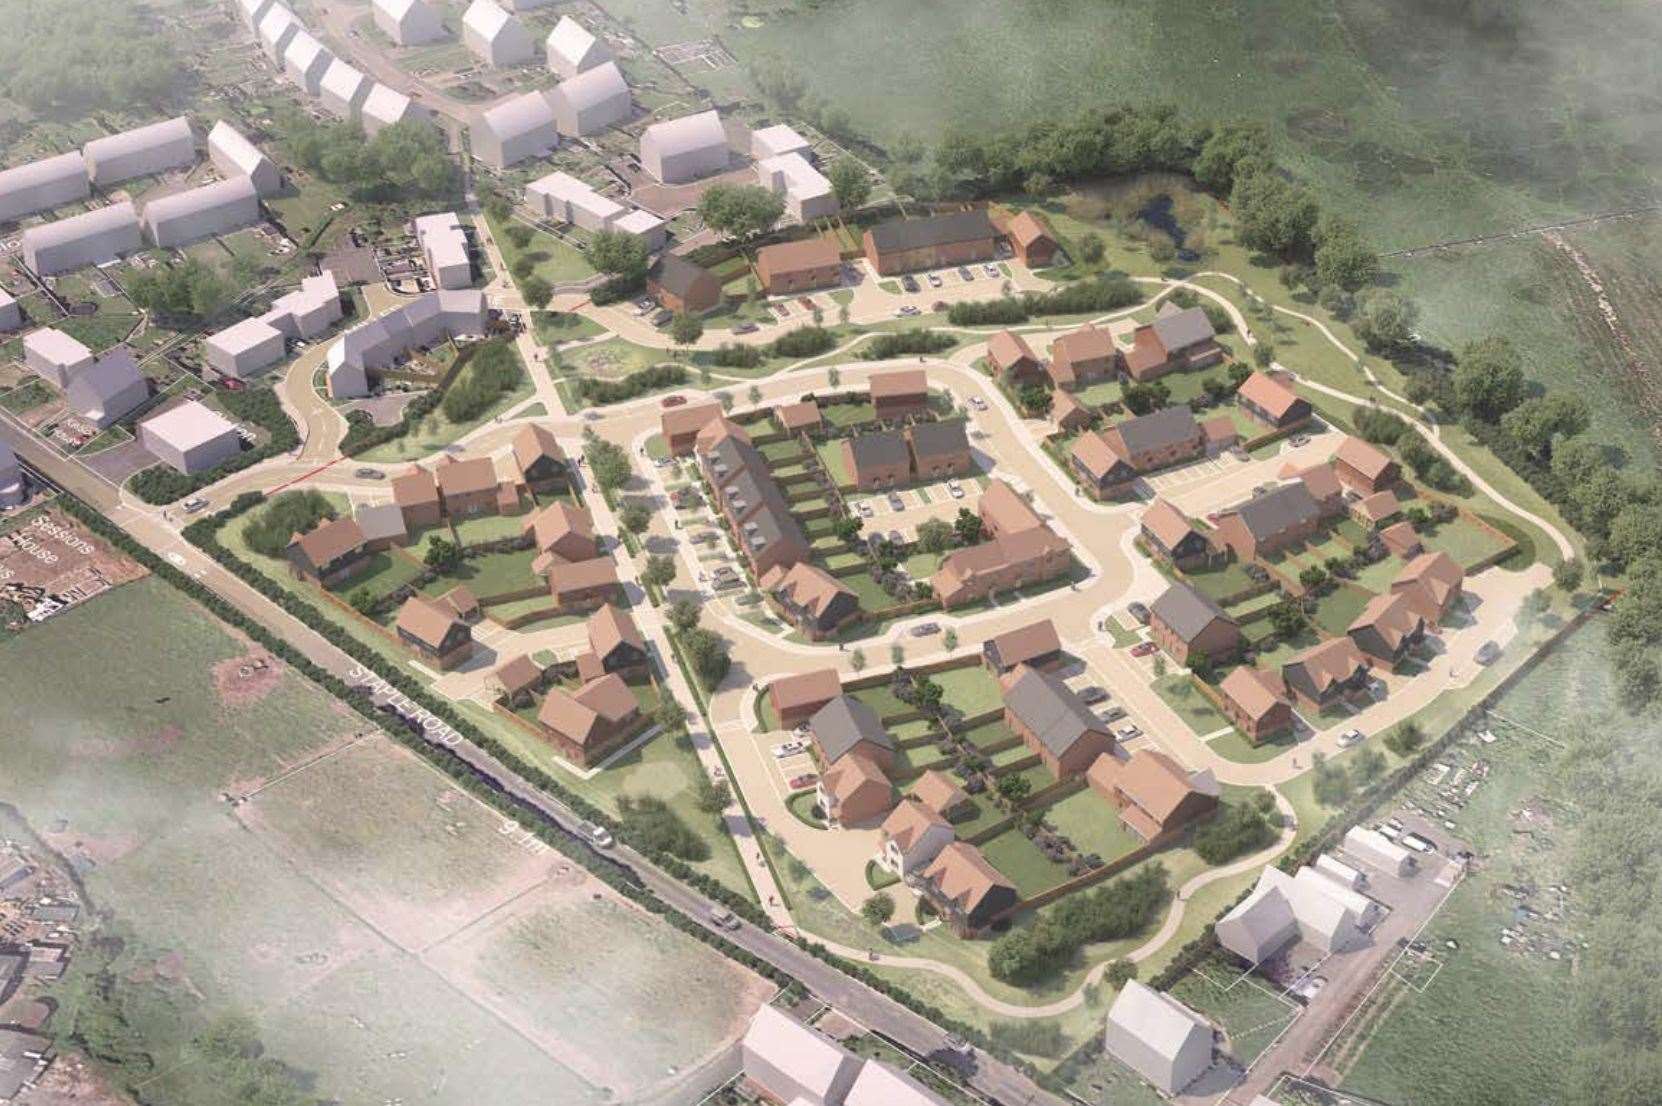 A CGI reveals how the homes could look